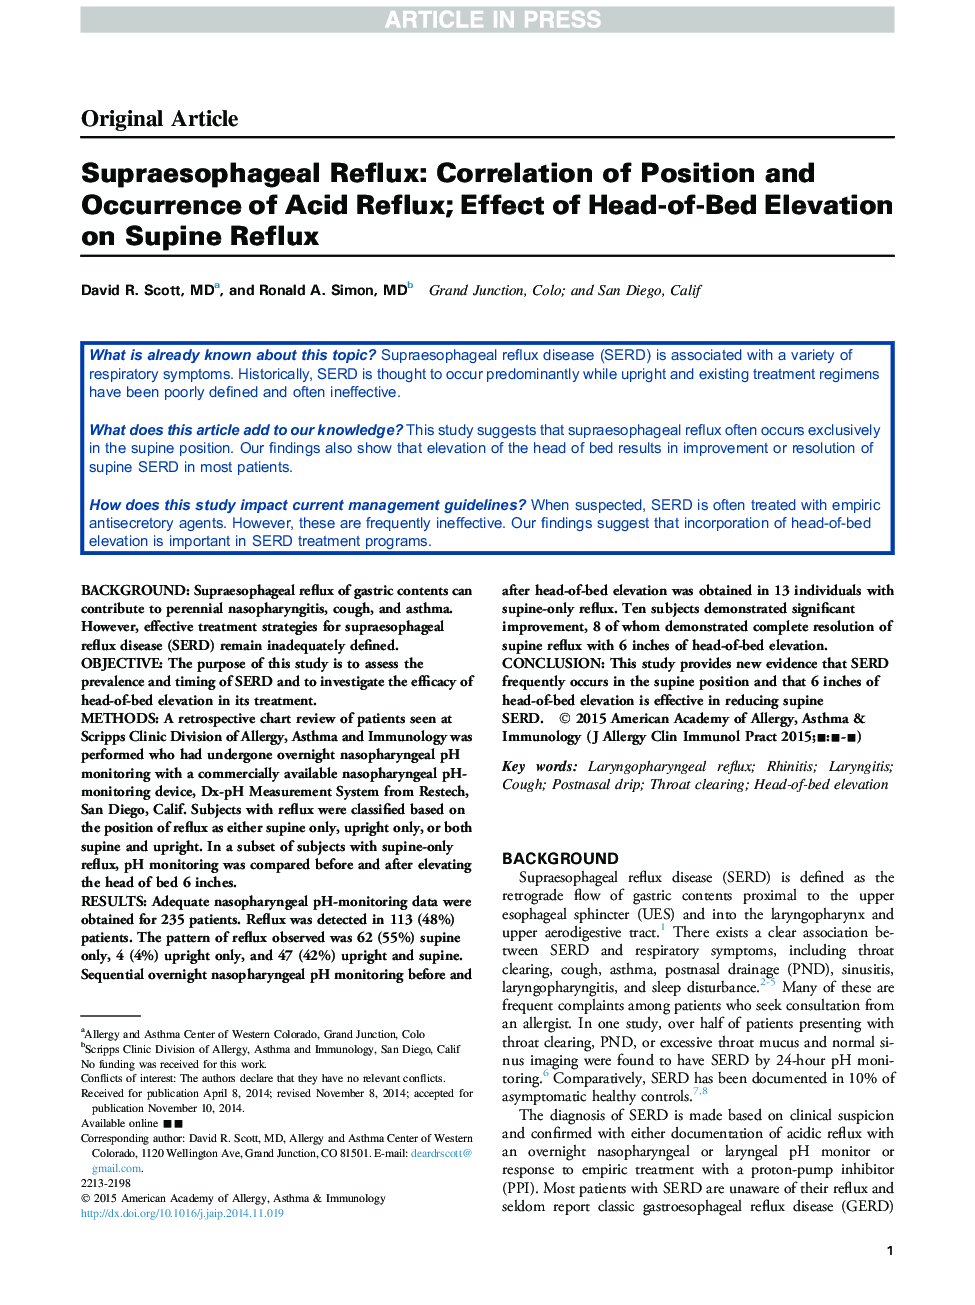 Supraesophageal Reflux: Correlation of Position and Occurrence of Acid Reflux-Effect of Head-of-Bed Elevation on Supine Reflux